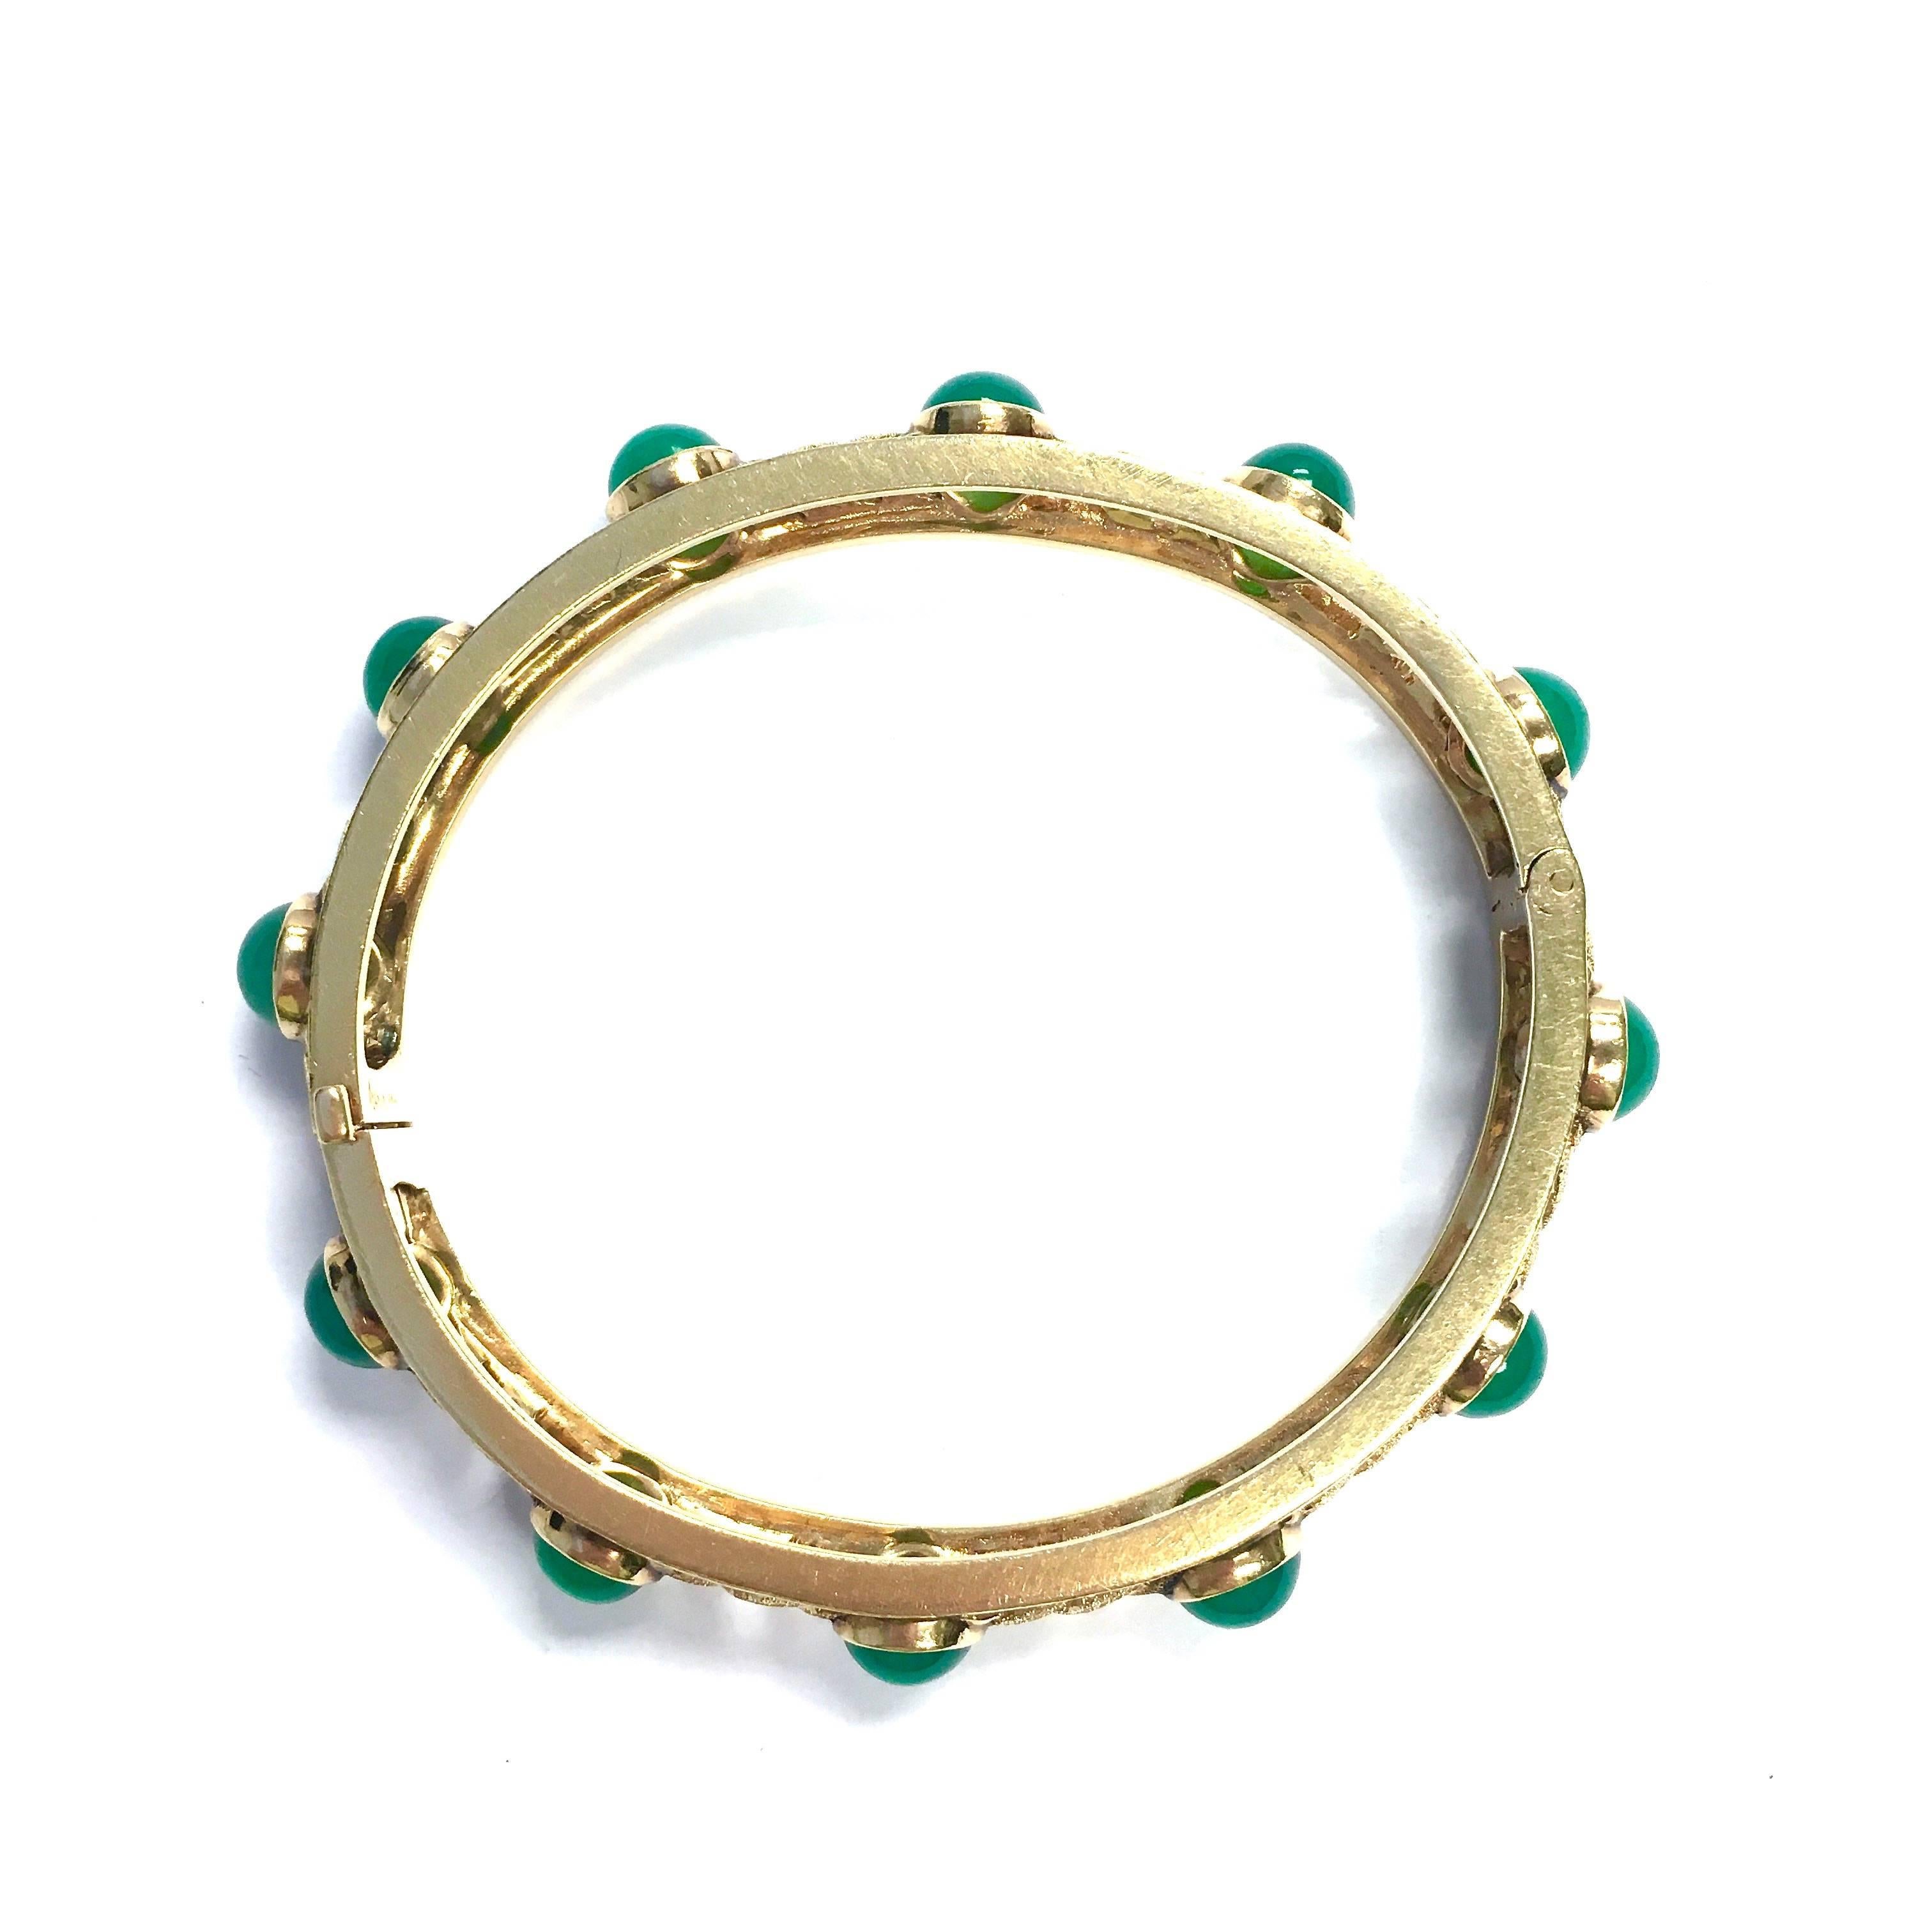 An other master piece of William Ruser. The bracelet is crafted in 14K yellow gold, featureing twelve bezel set round cabochon green chalcedony incorporated with a textured finished wavy design. 
Measurements: 
Inner circumference: 6.75